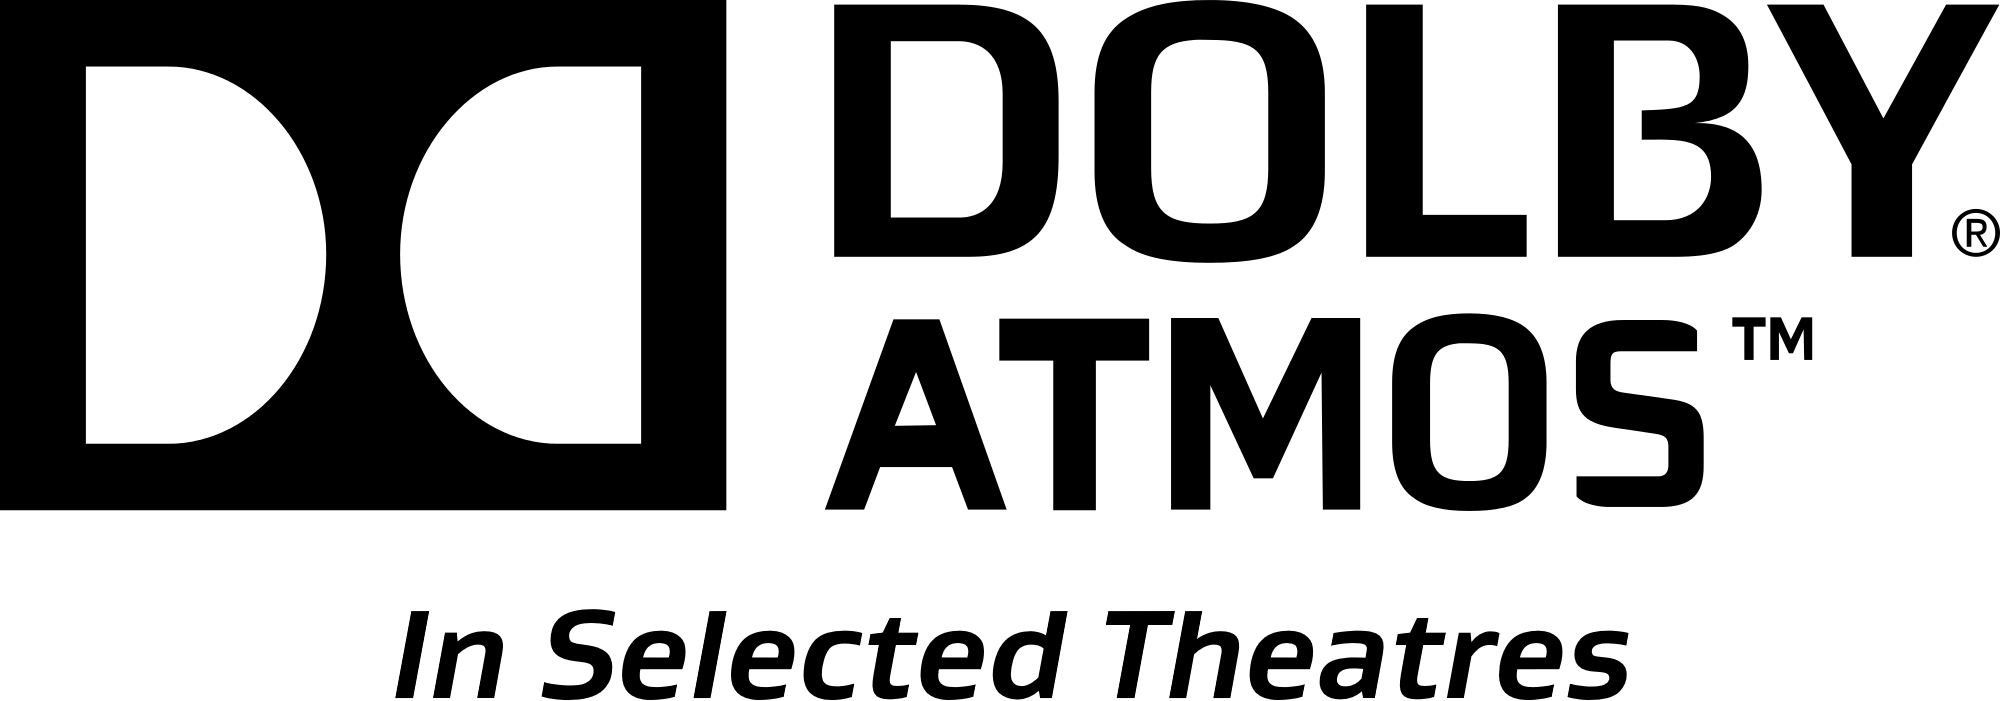 Dolby in Selected Theaters Logo - Image - Dolby Atmos 2013.png | Logopedia | FANDOM powered by Wikia